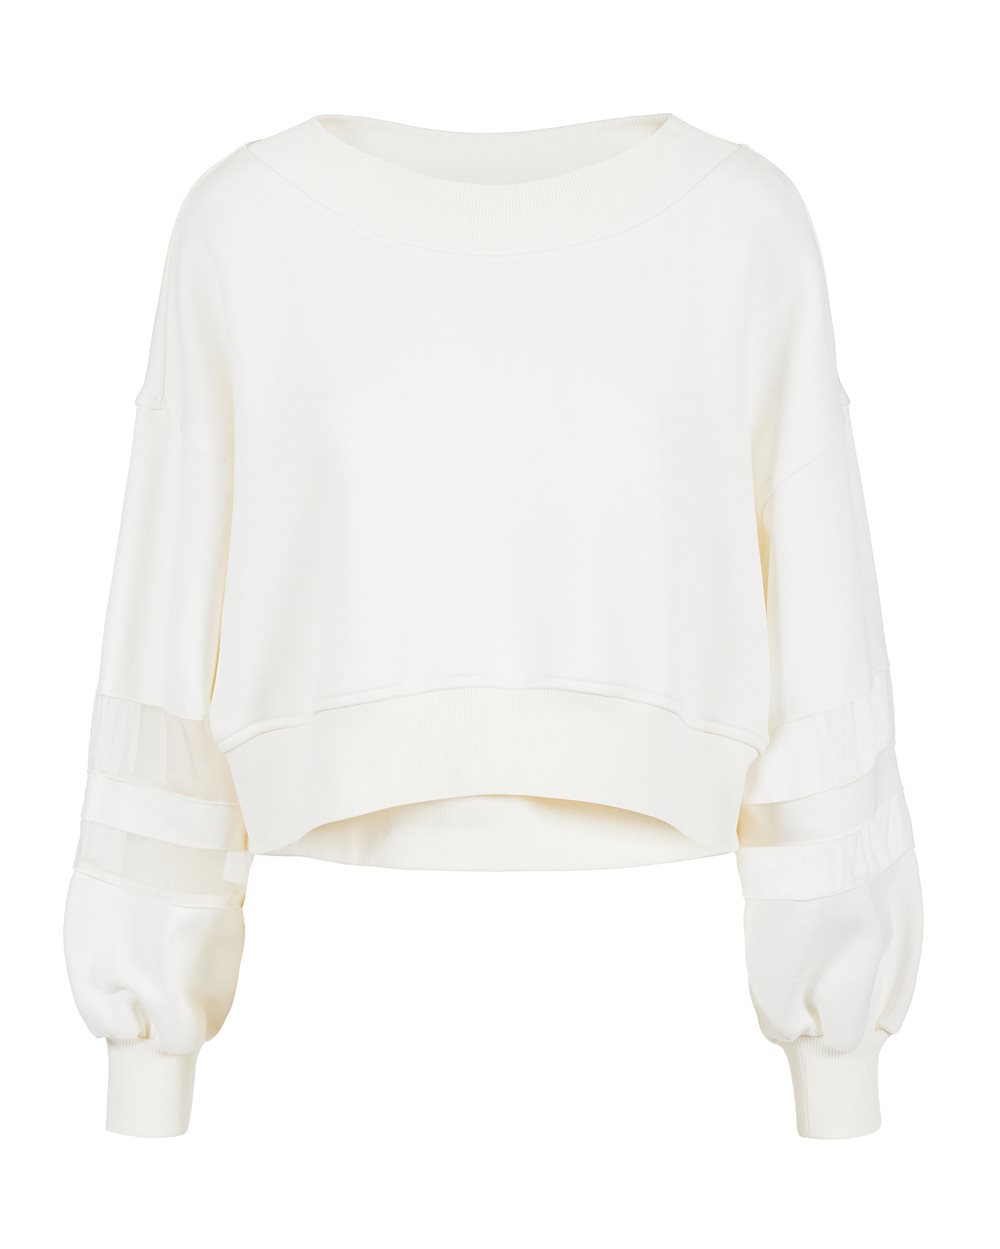 Sweatshirt with logo and organza details | Iceberg - Official Website